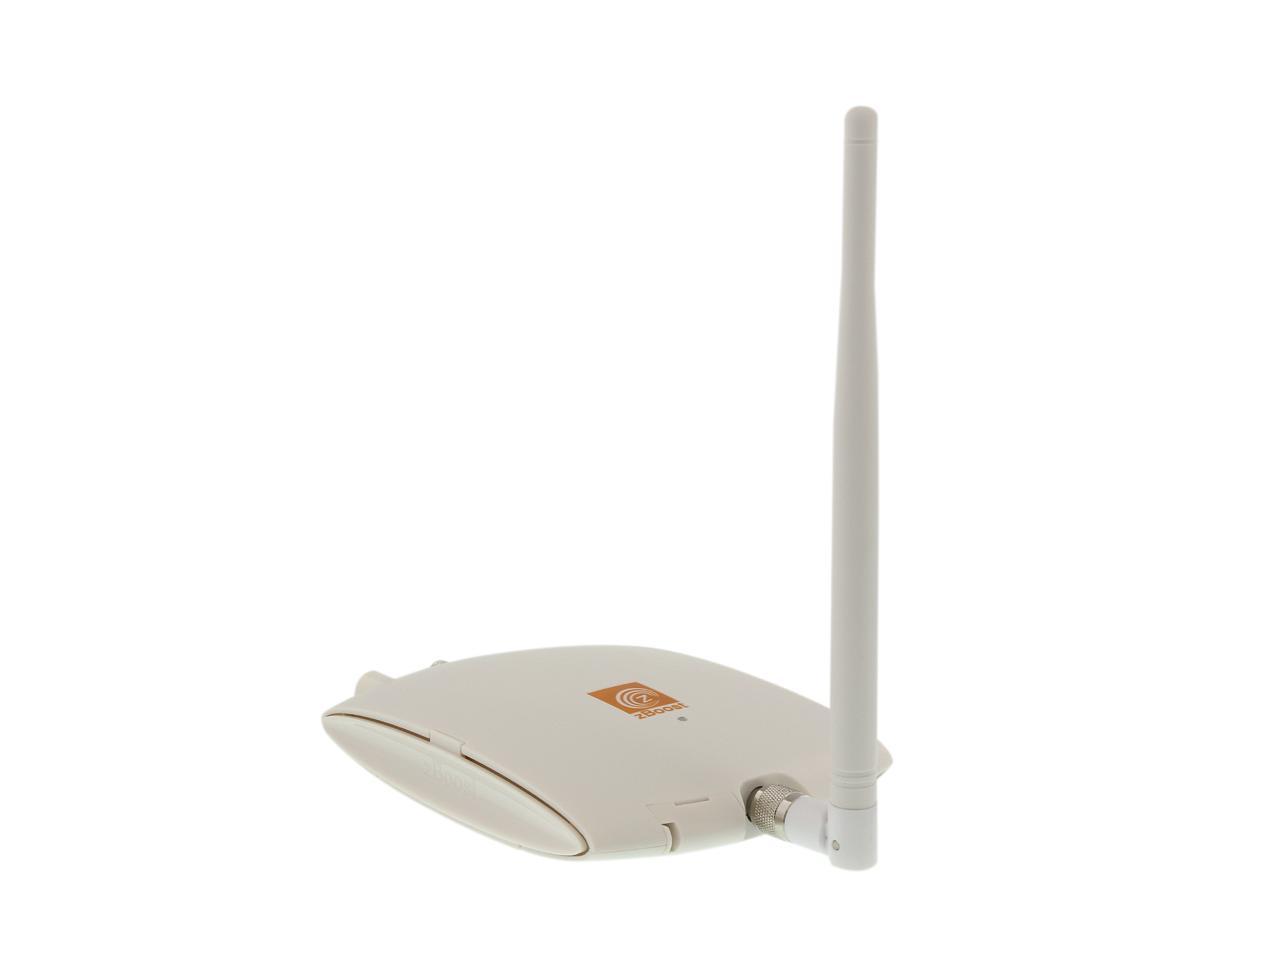 zBoost SOHO, dual-band cell phone signal booster, up to 2500 sq. ft